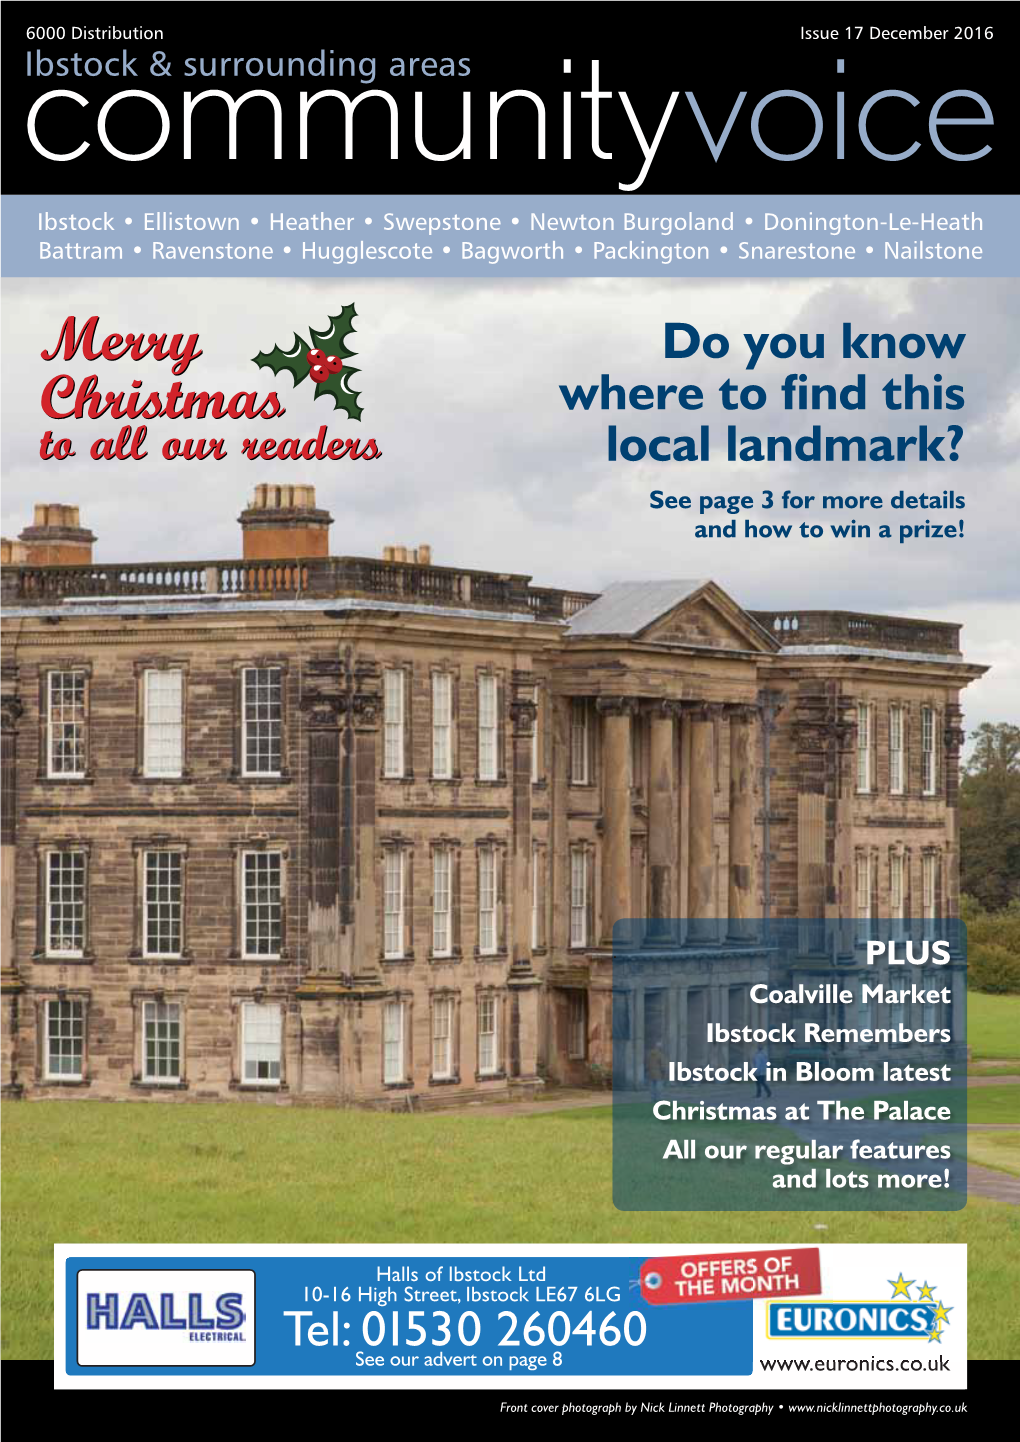 Coalville Market Ibstock Remembers Ibstock in Bloom Latest Christmas at the Palace All Our Regular Features and Lots More!